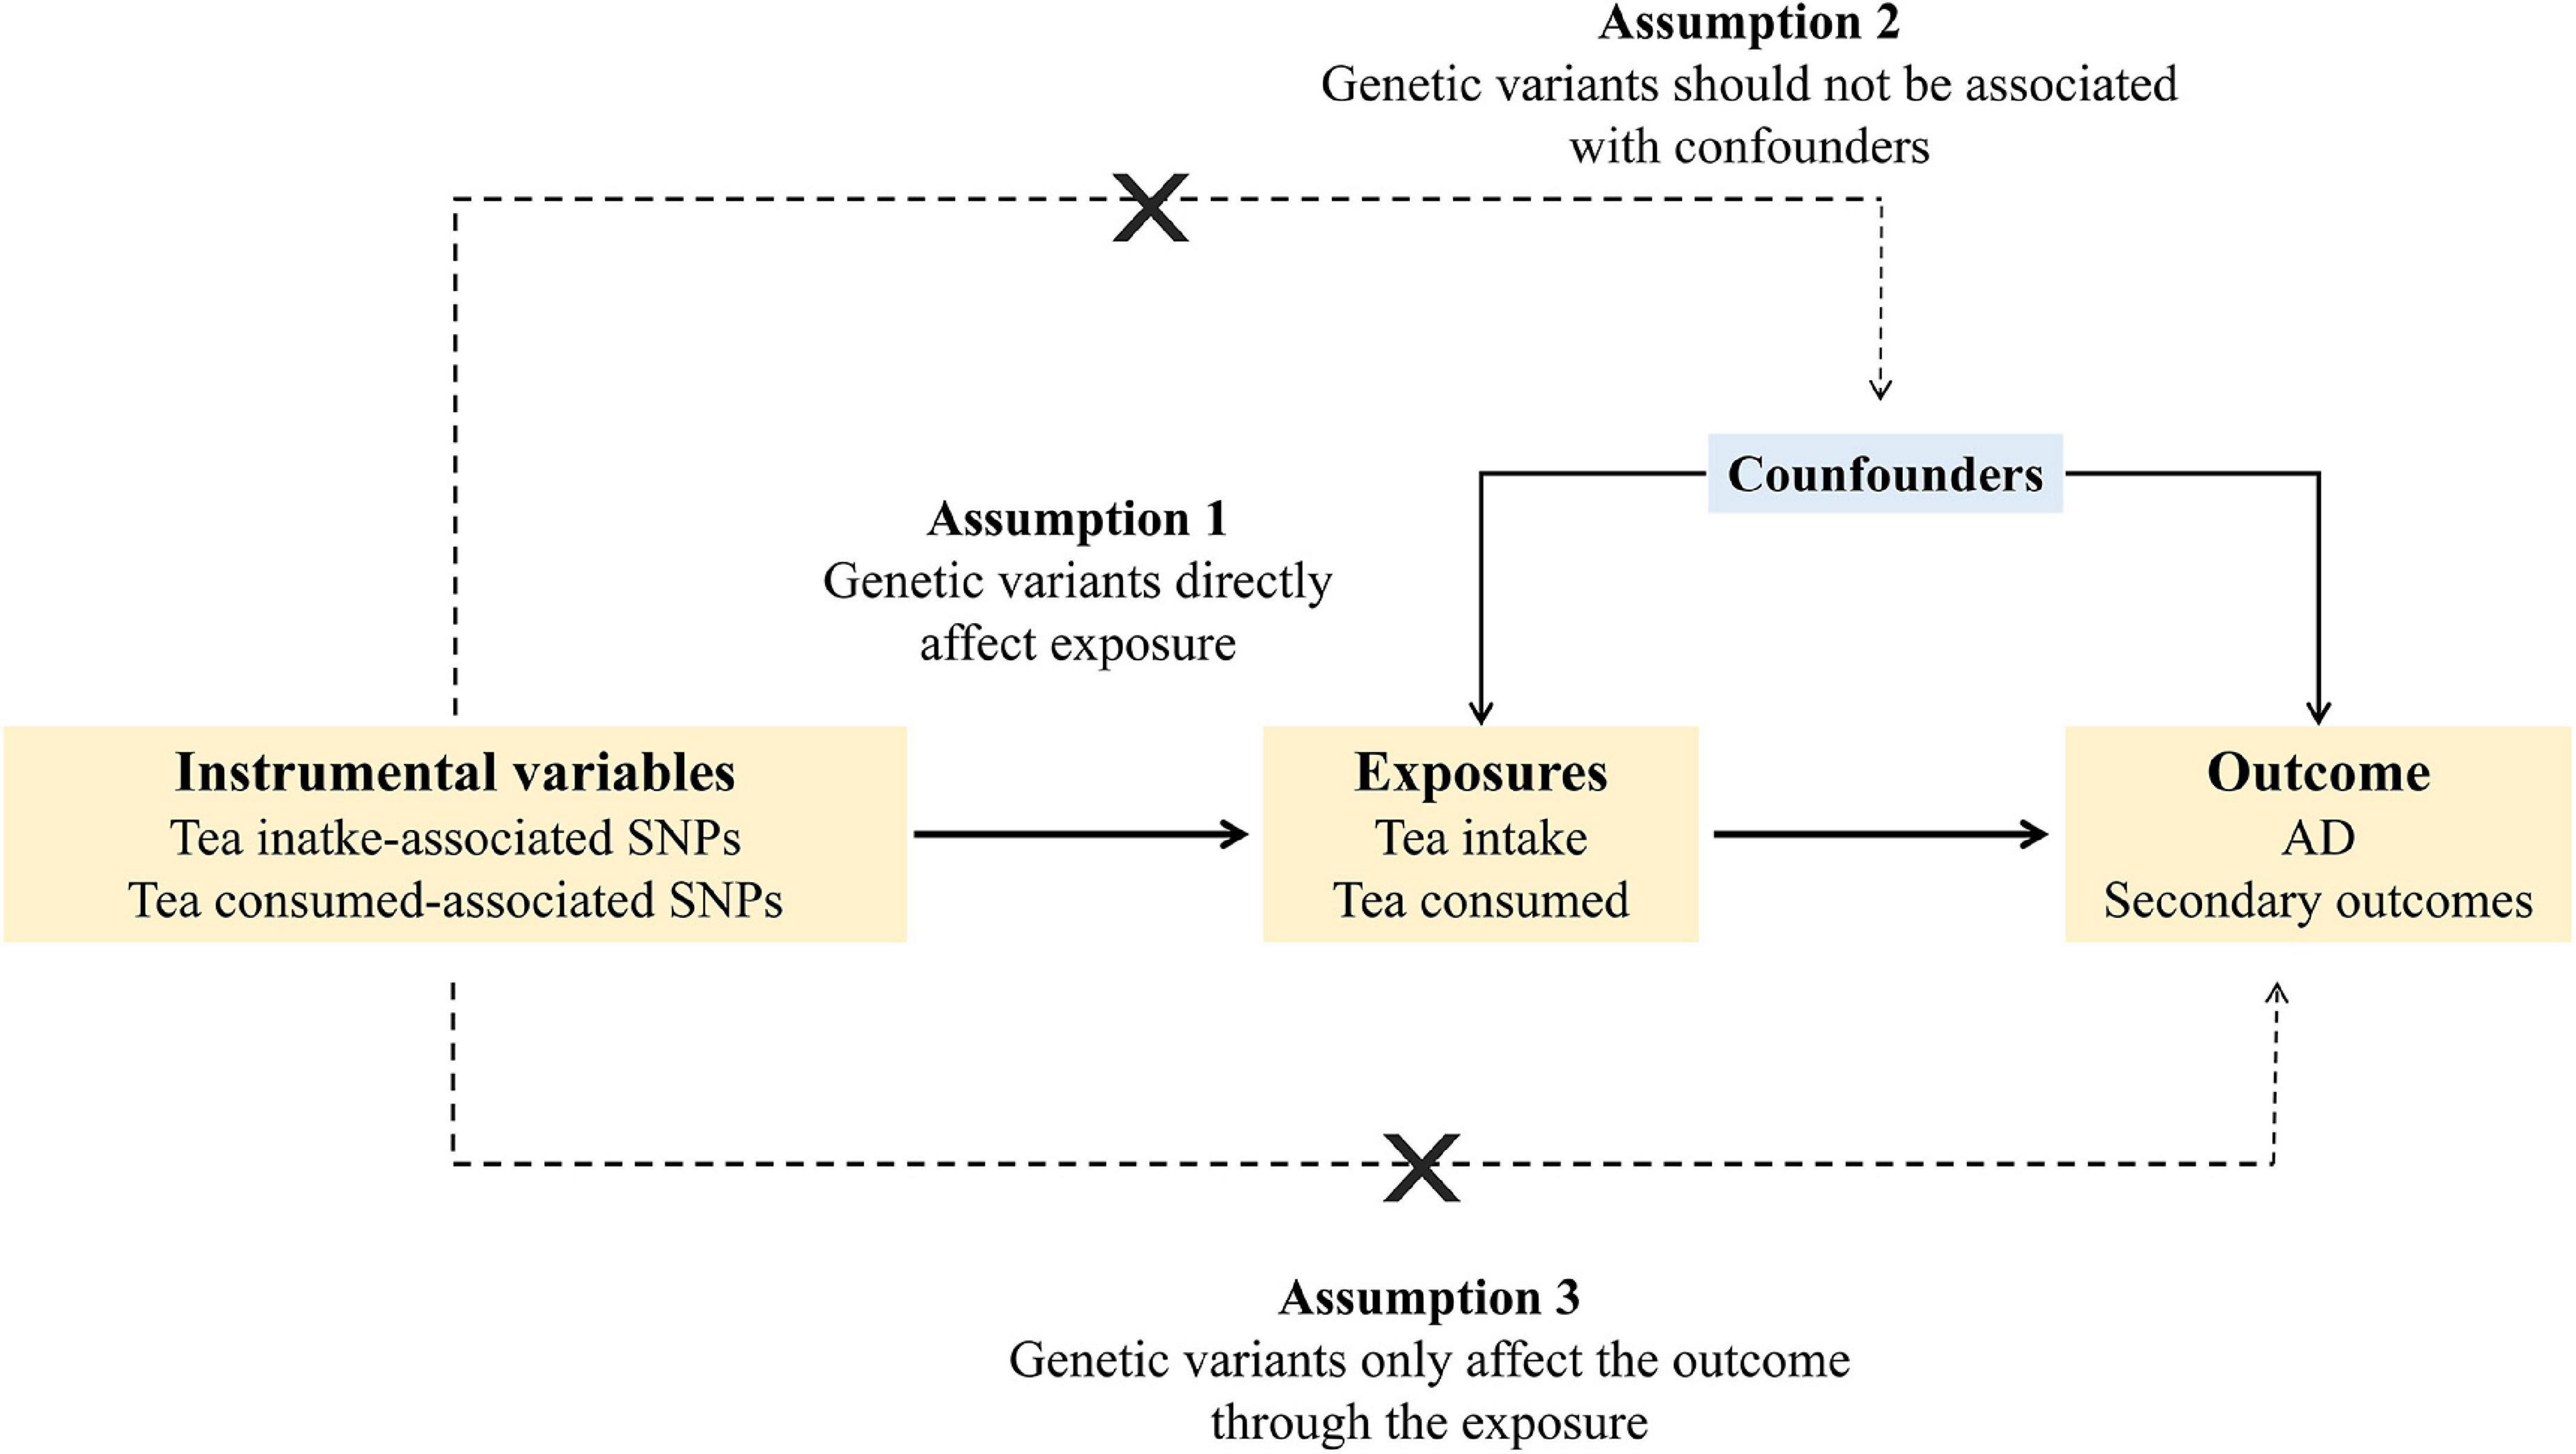 Extra cup of tea intake associated with increased risk of Alzheimer’s disease: Genetic insights from Mendelian randomization